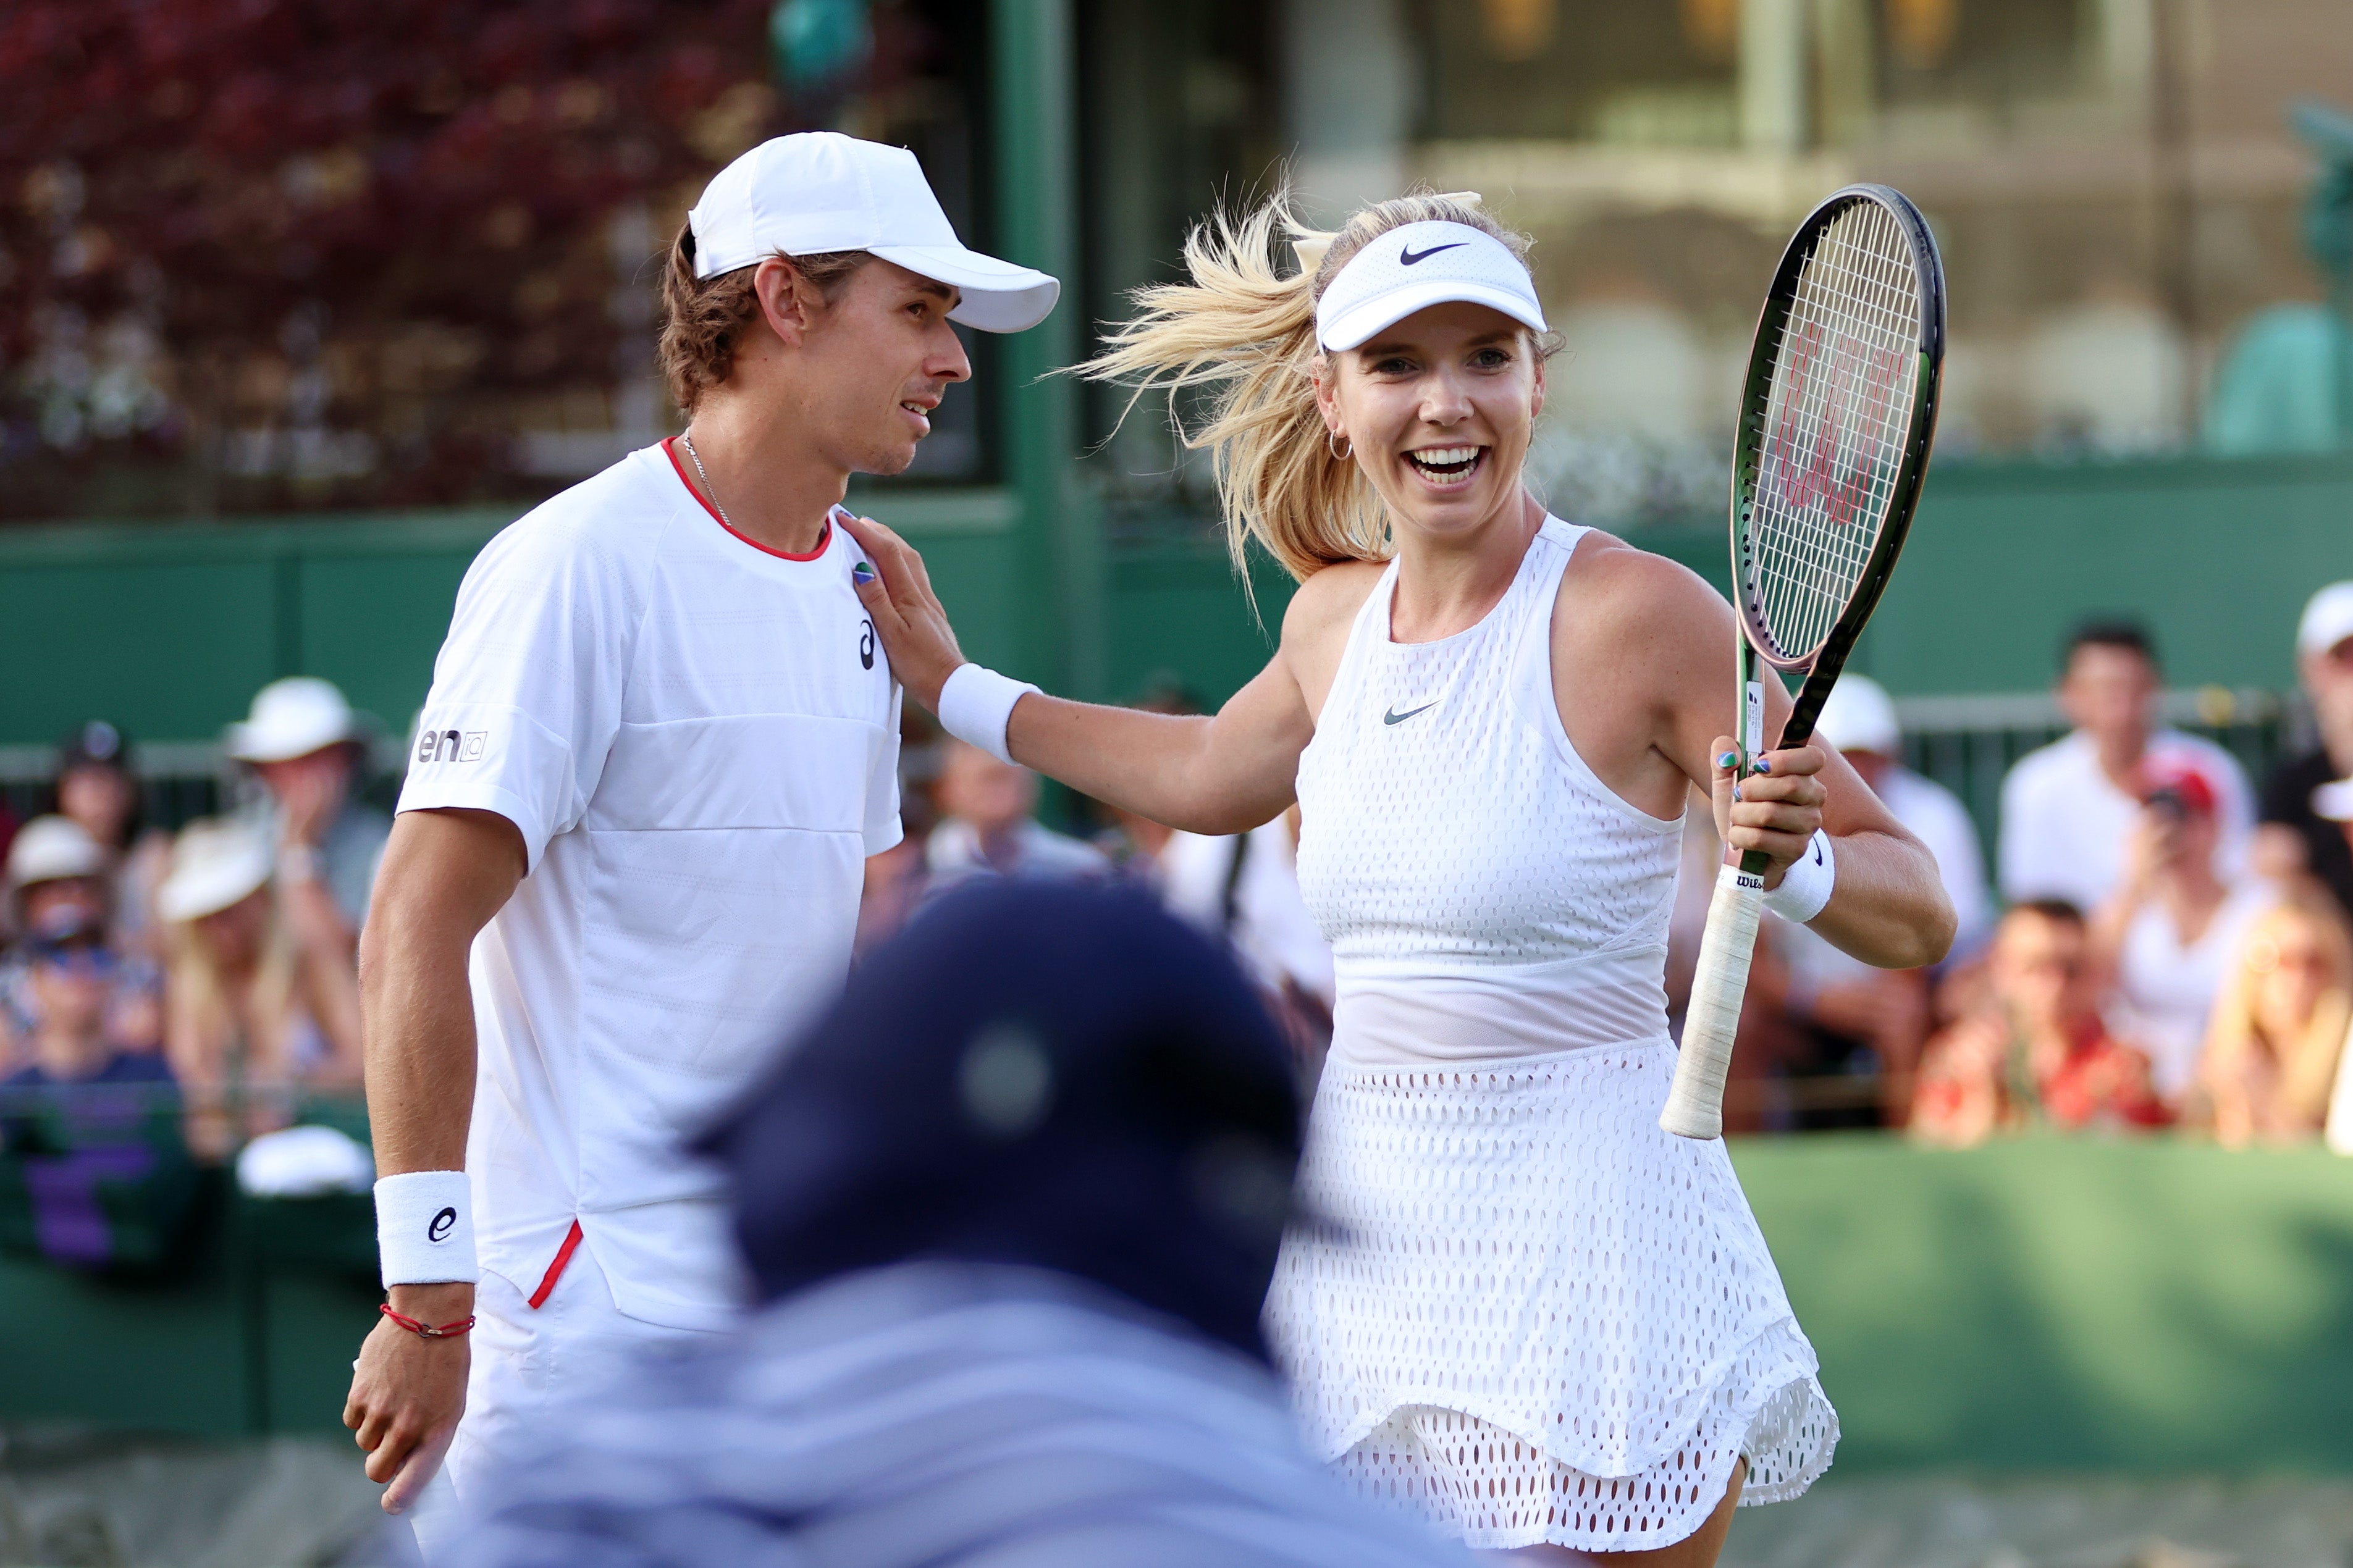 Alex De Minaur and girlfriend Katie Boulter in action in the mixed doubles at Wimbledon